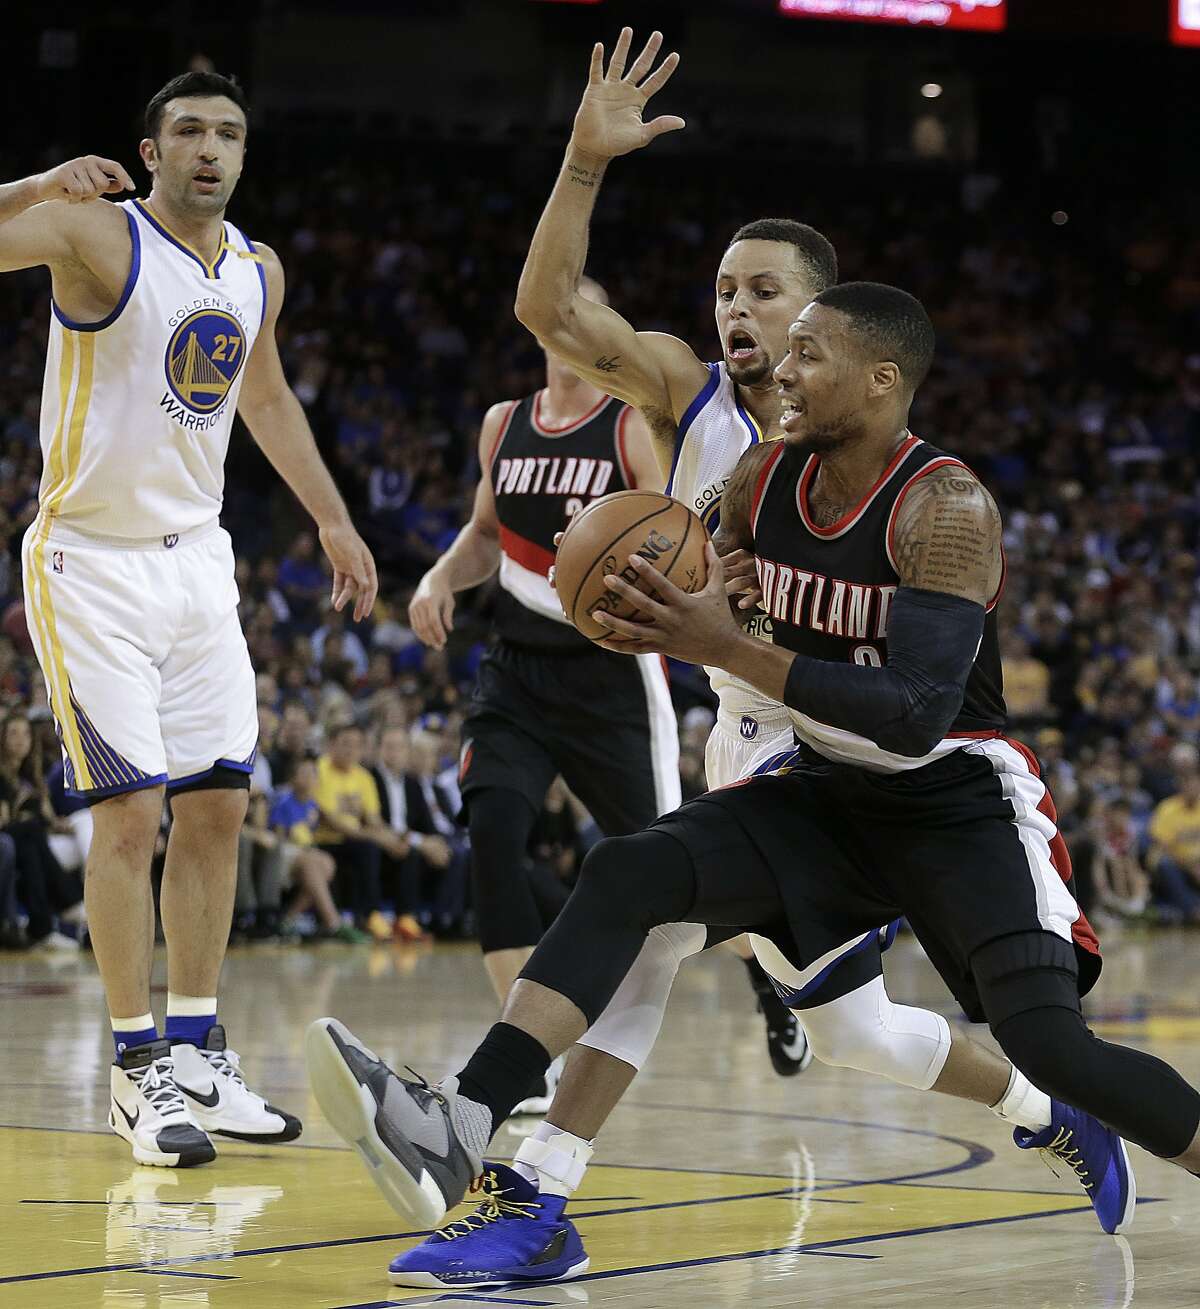 Portland Trail Blazers' Damian Lillard, right, drives the ball as Golden State Warriors' Stephen Curry defends during the first half of a preseason NBA basketball game Friday, Oct. 21, 2016, in Oakland, Calif. At left is Warriors' Zaza Pachulia. (AP Photo/Ben Margot)